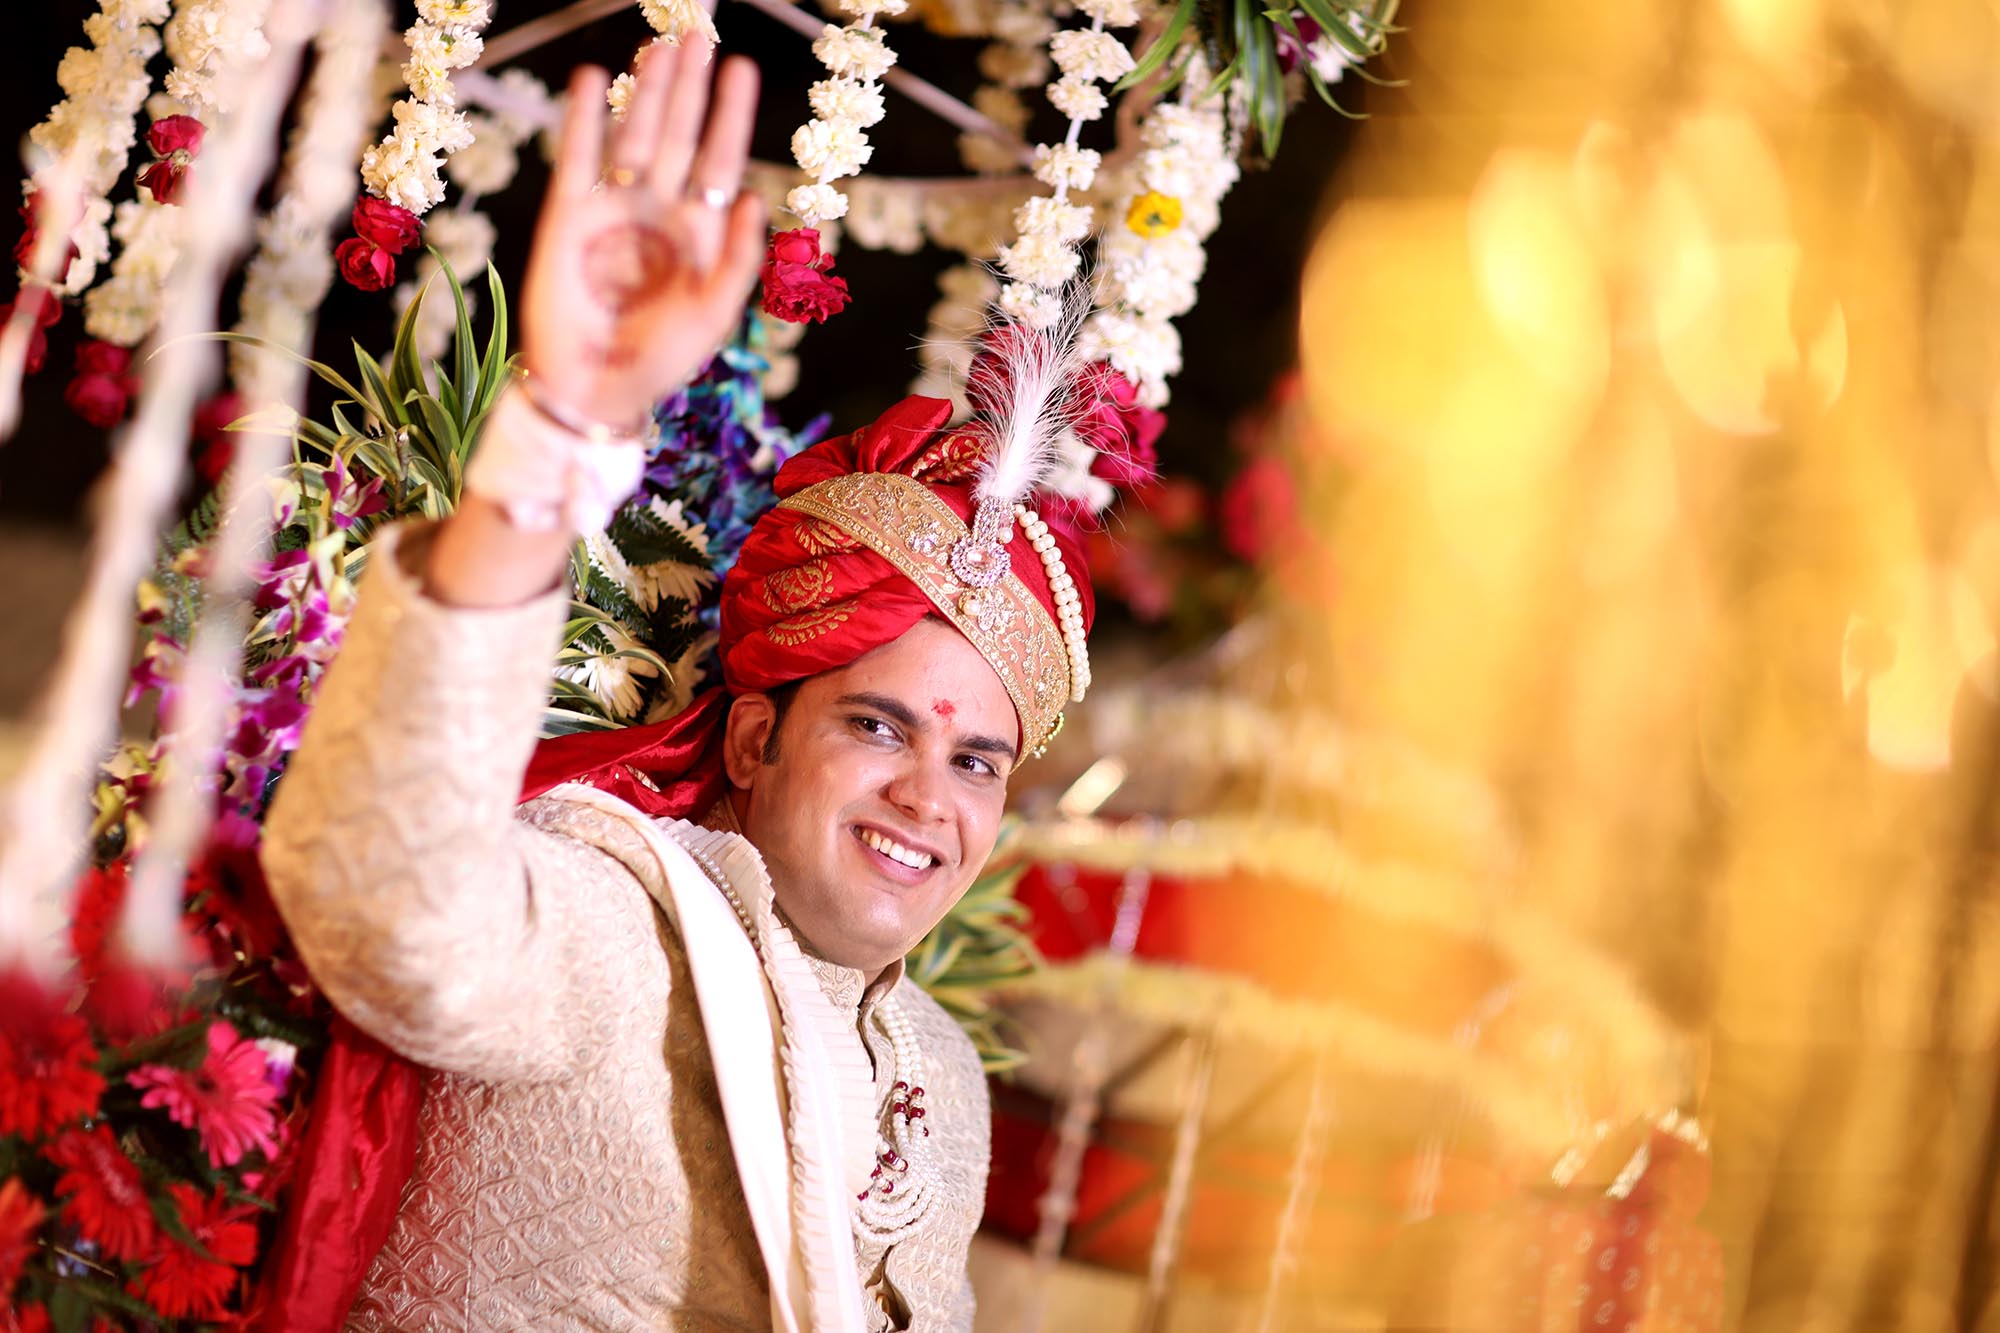 Pin on Brides & Grooms by Weddingsonline India